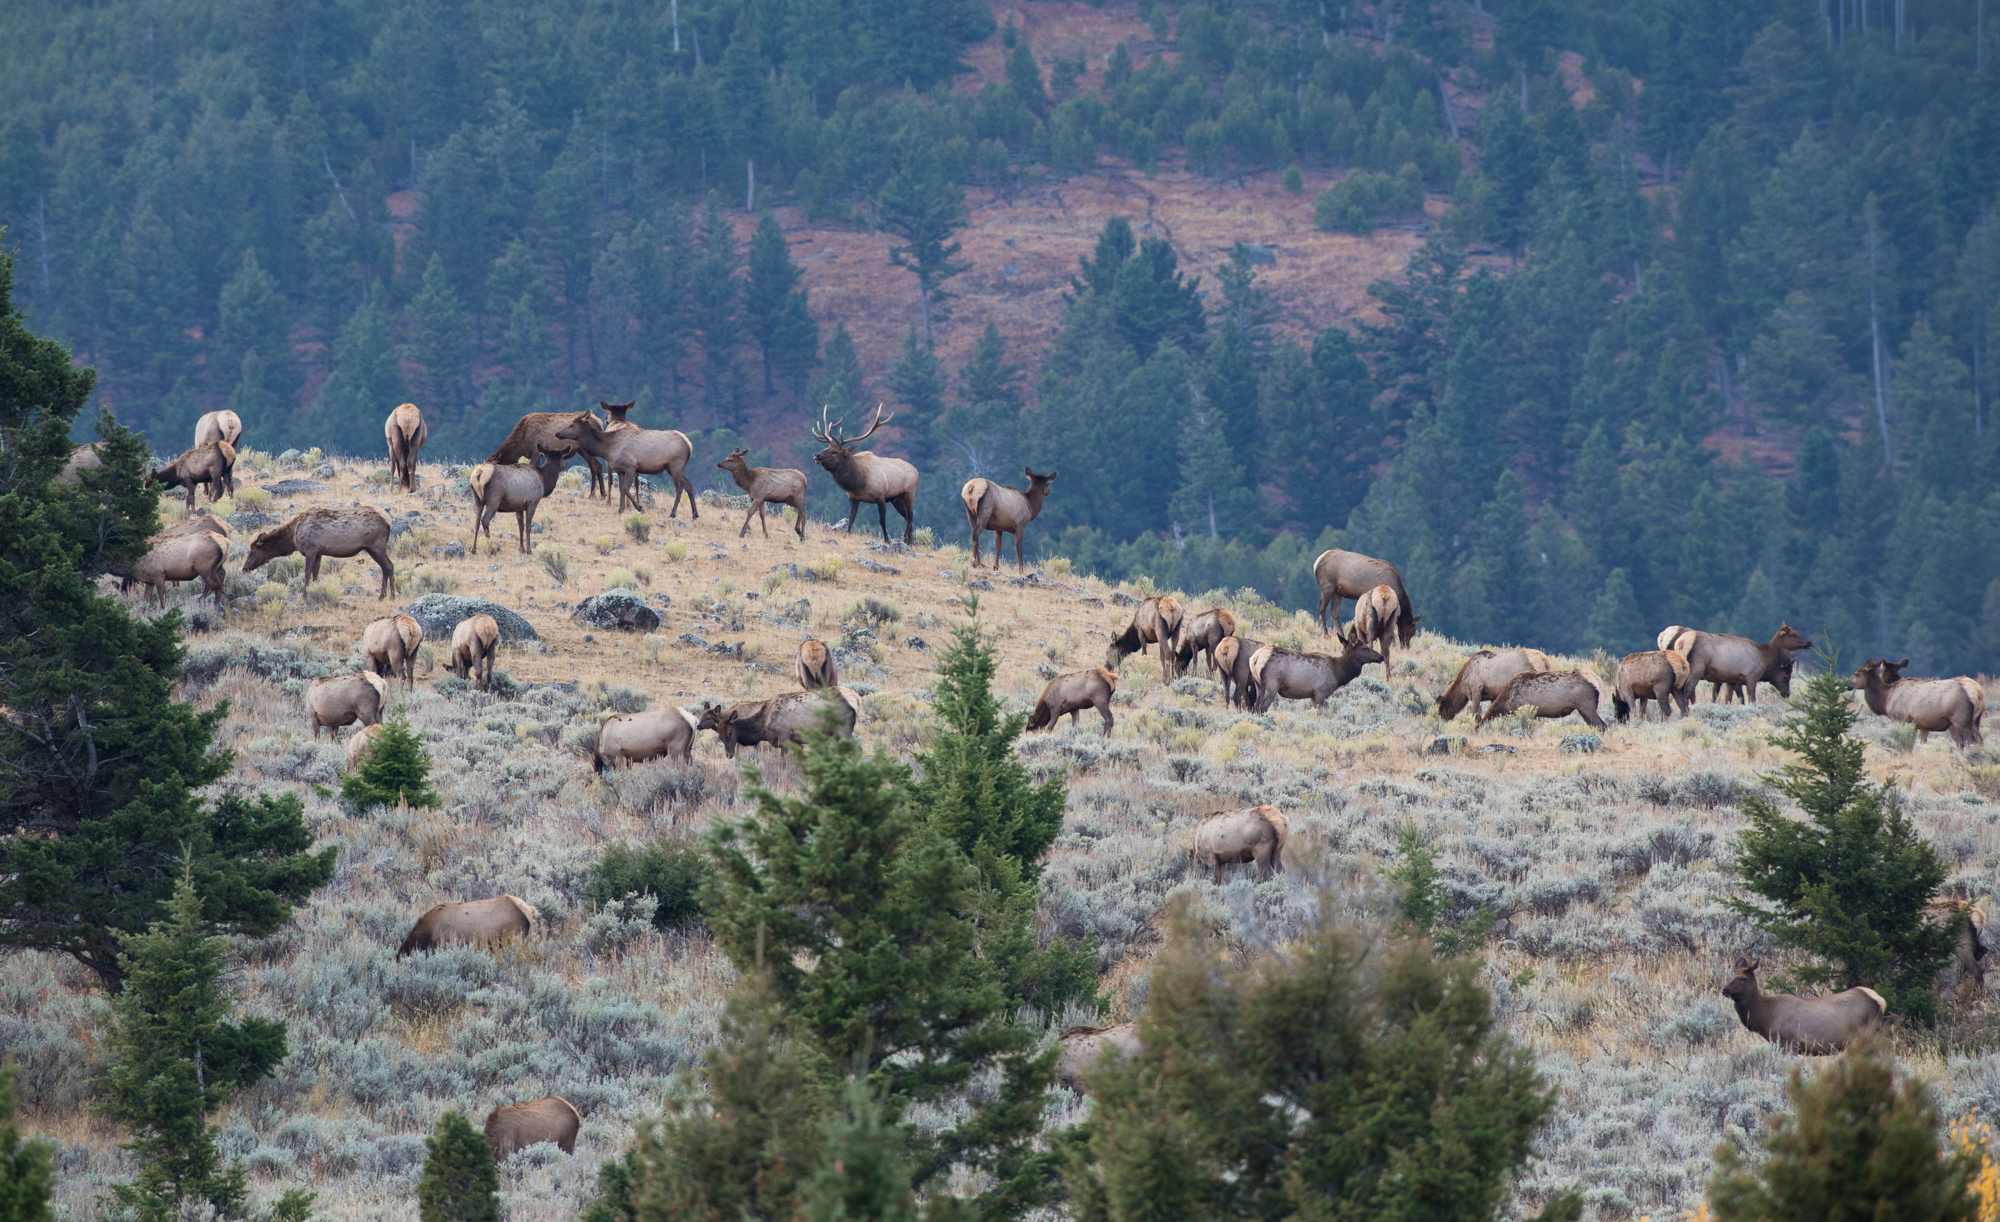 A herd of elk on a ridge in the mountains.